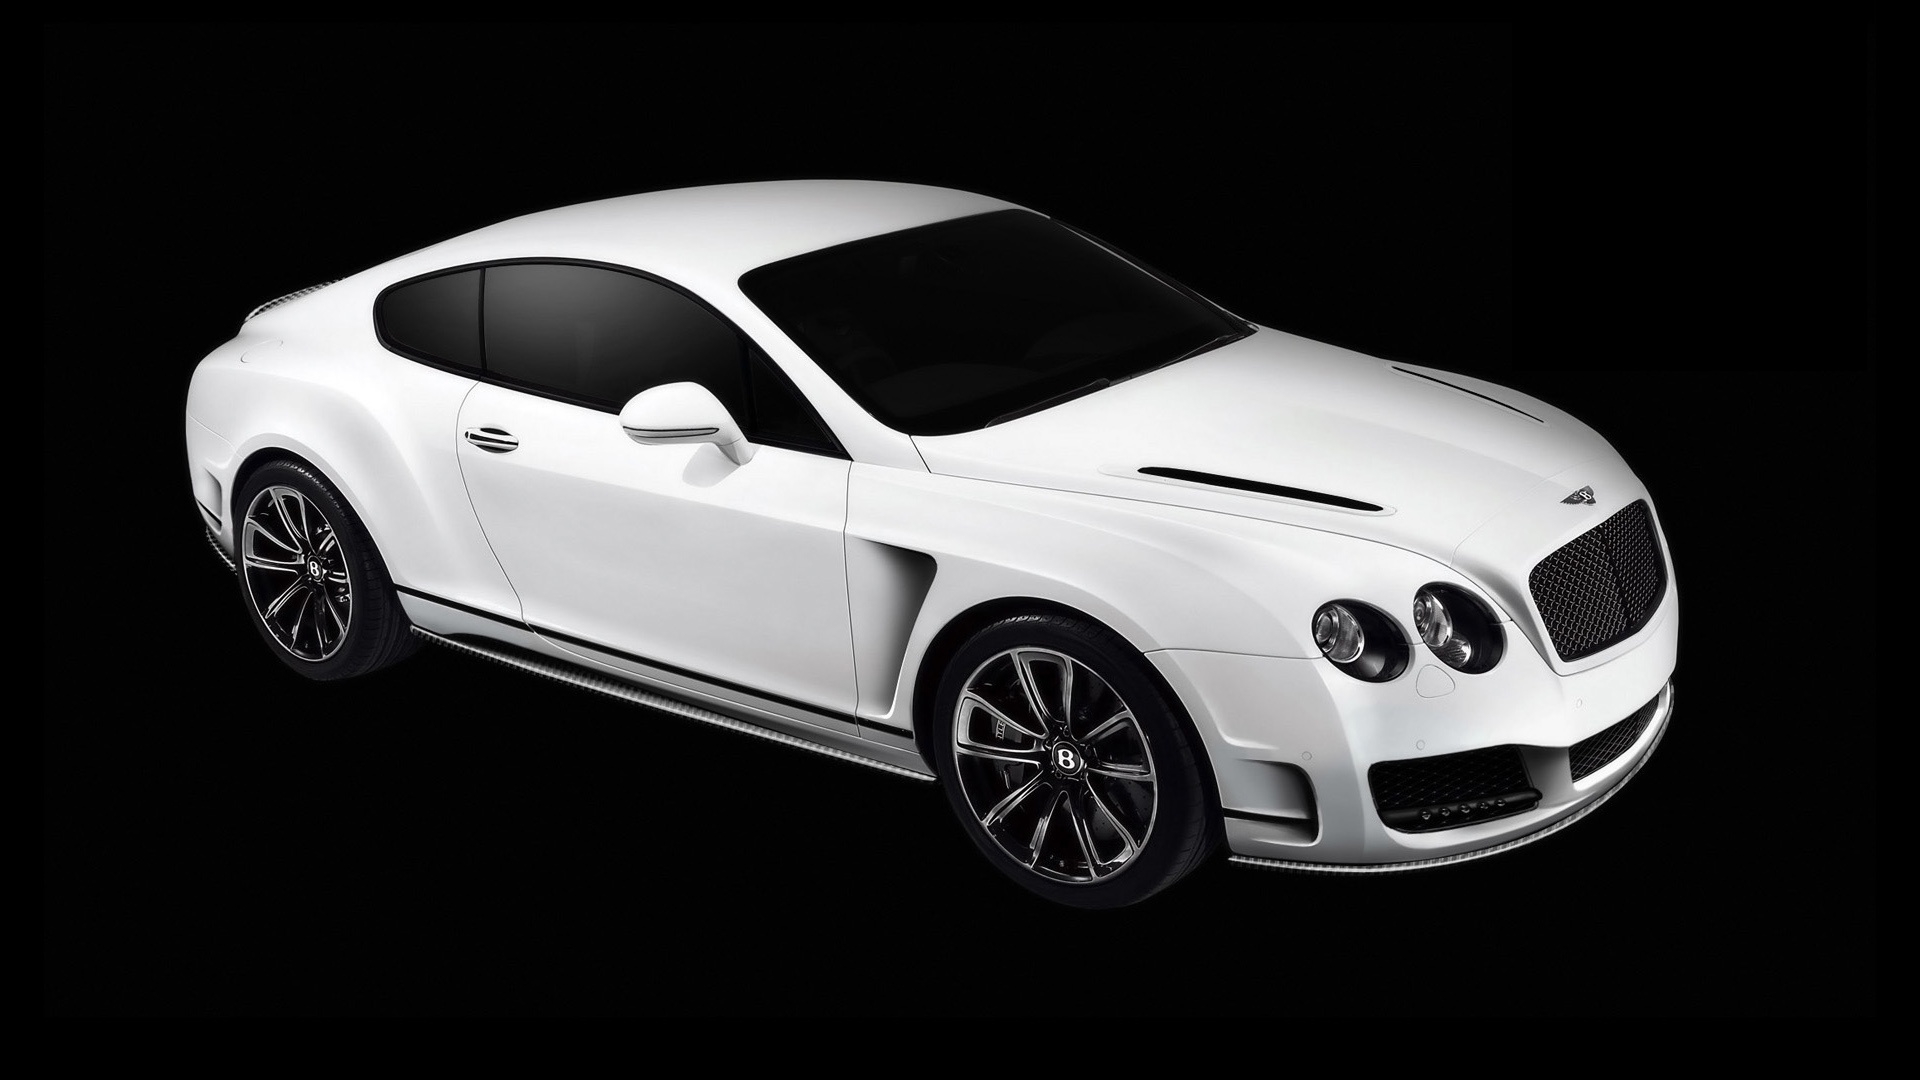 2010 Bentley Continental GT Bullet White for 1920 x 1080 HDTV 1080p resolution